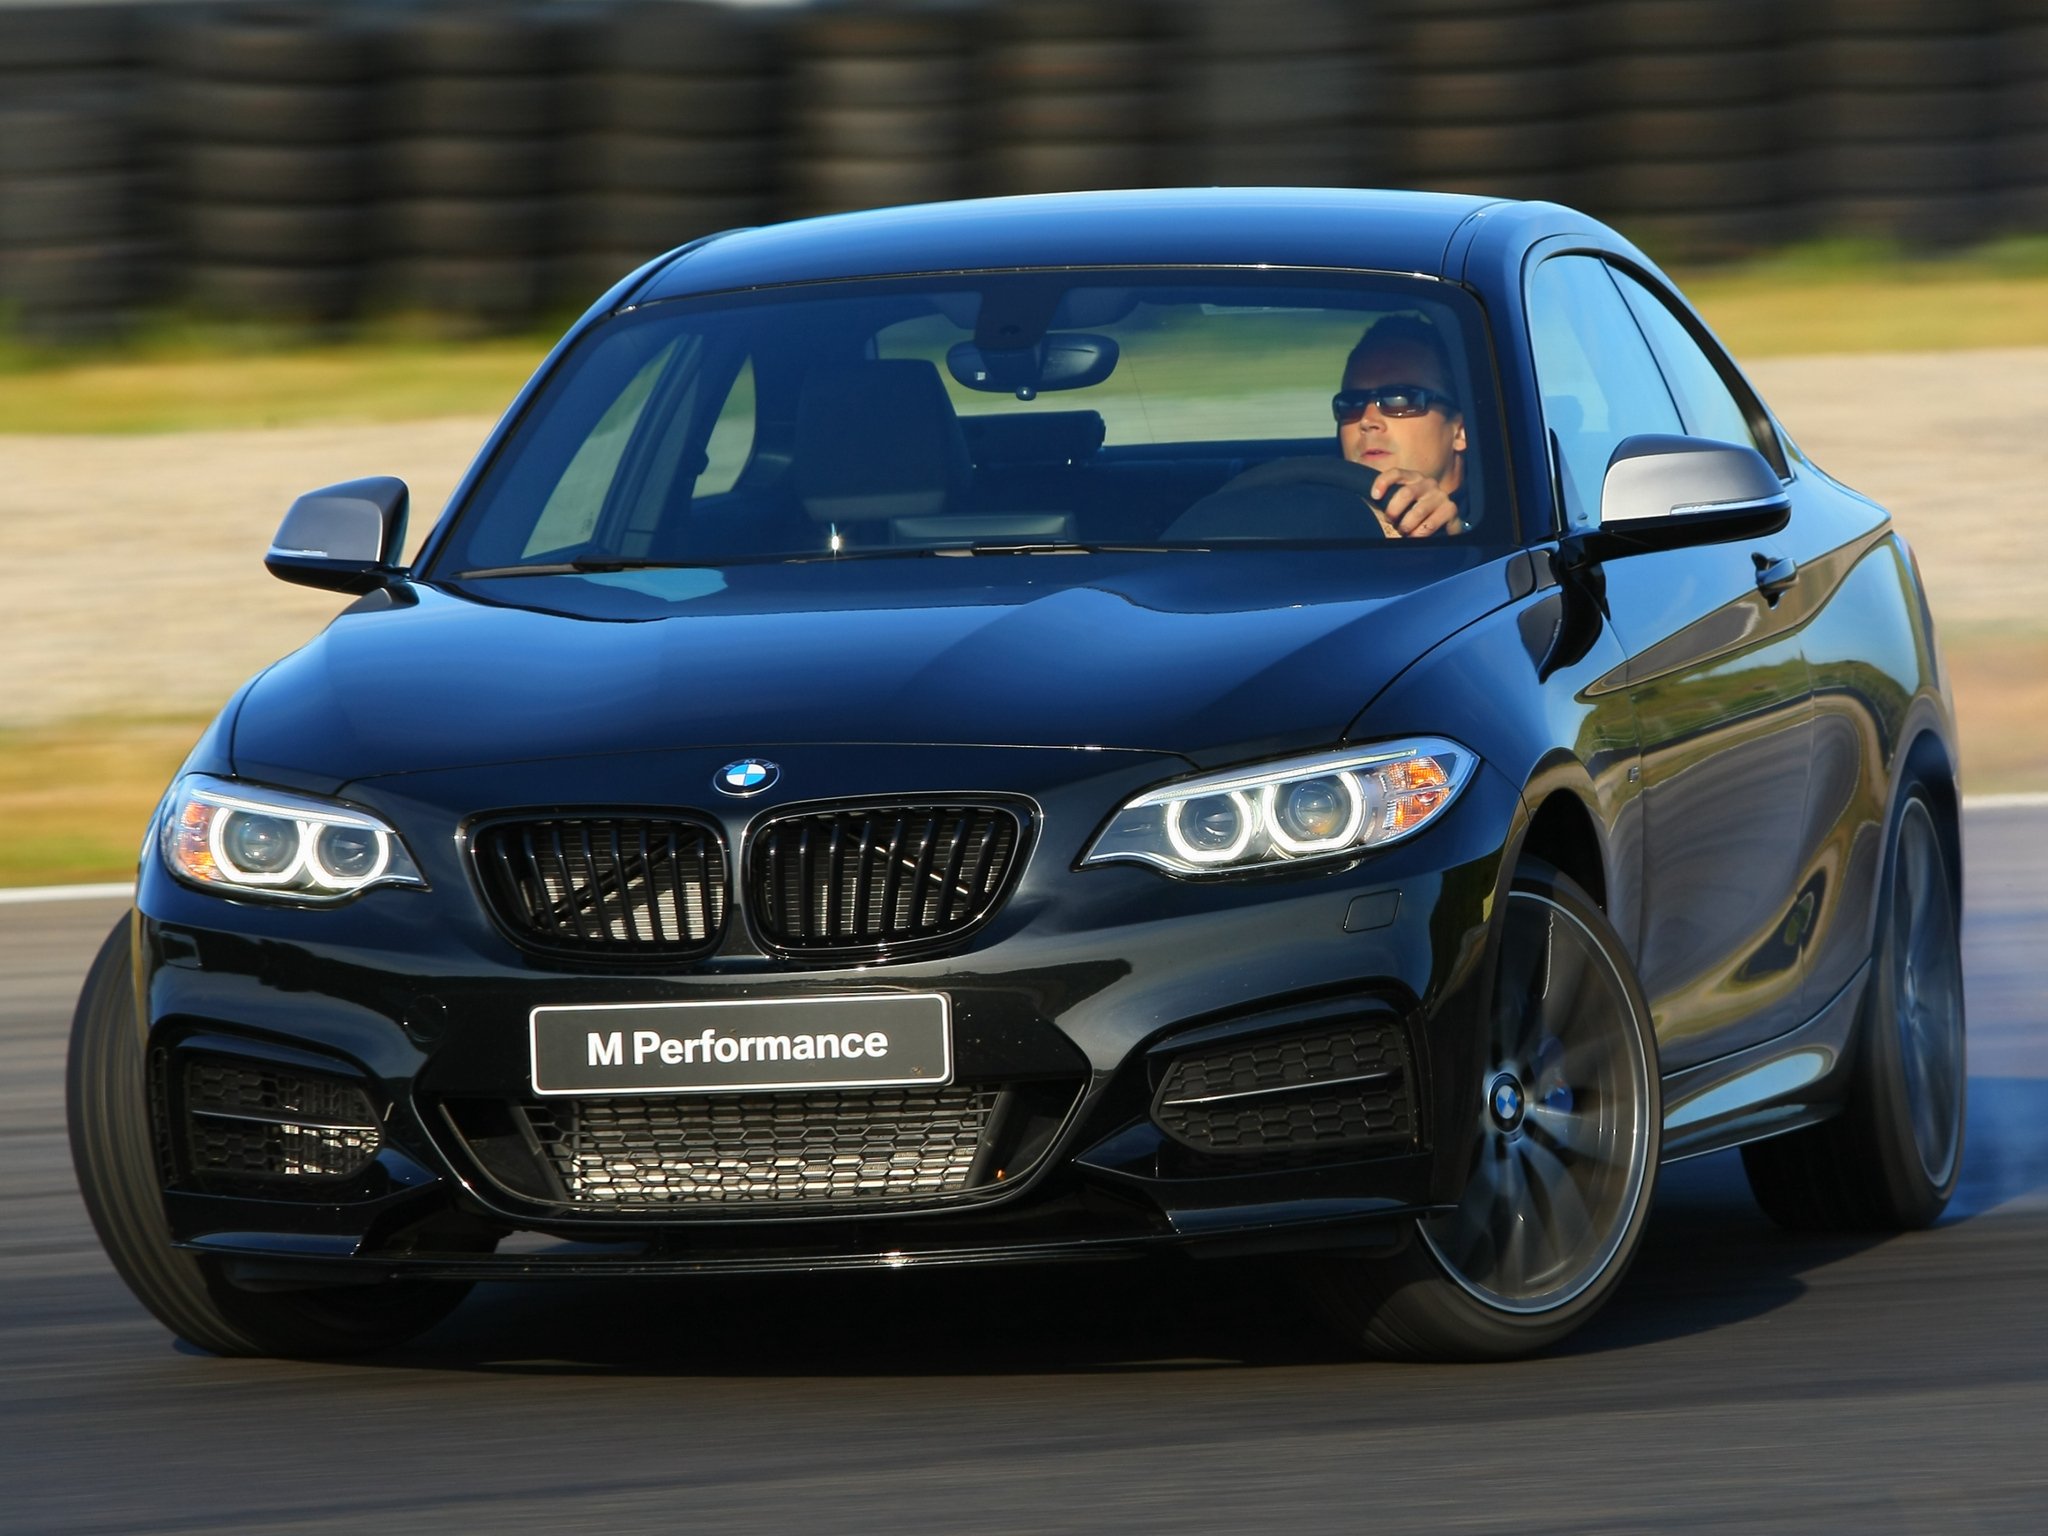 2014 Bmw M235i Coupe Track Edition F22 De Wallpapers Hd Desktop And Mobile Backgrounds